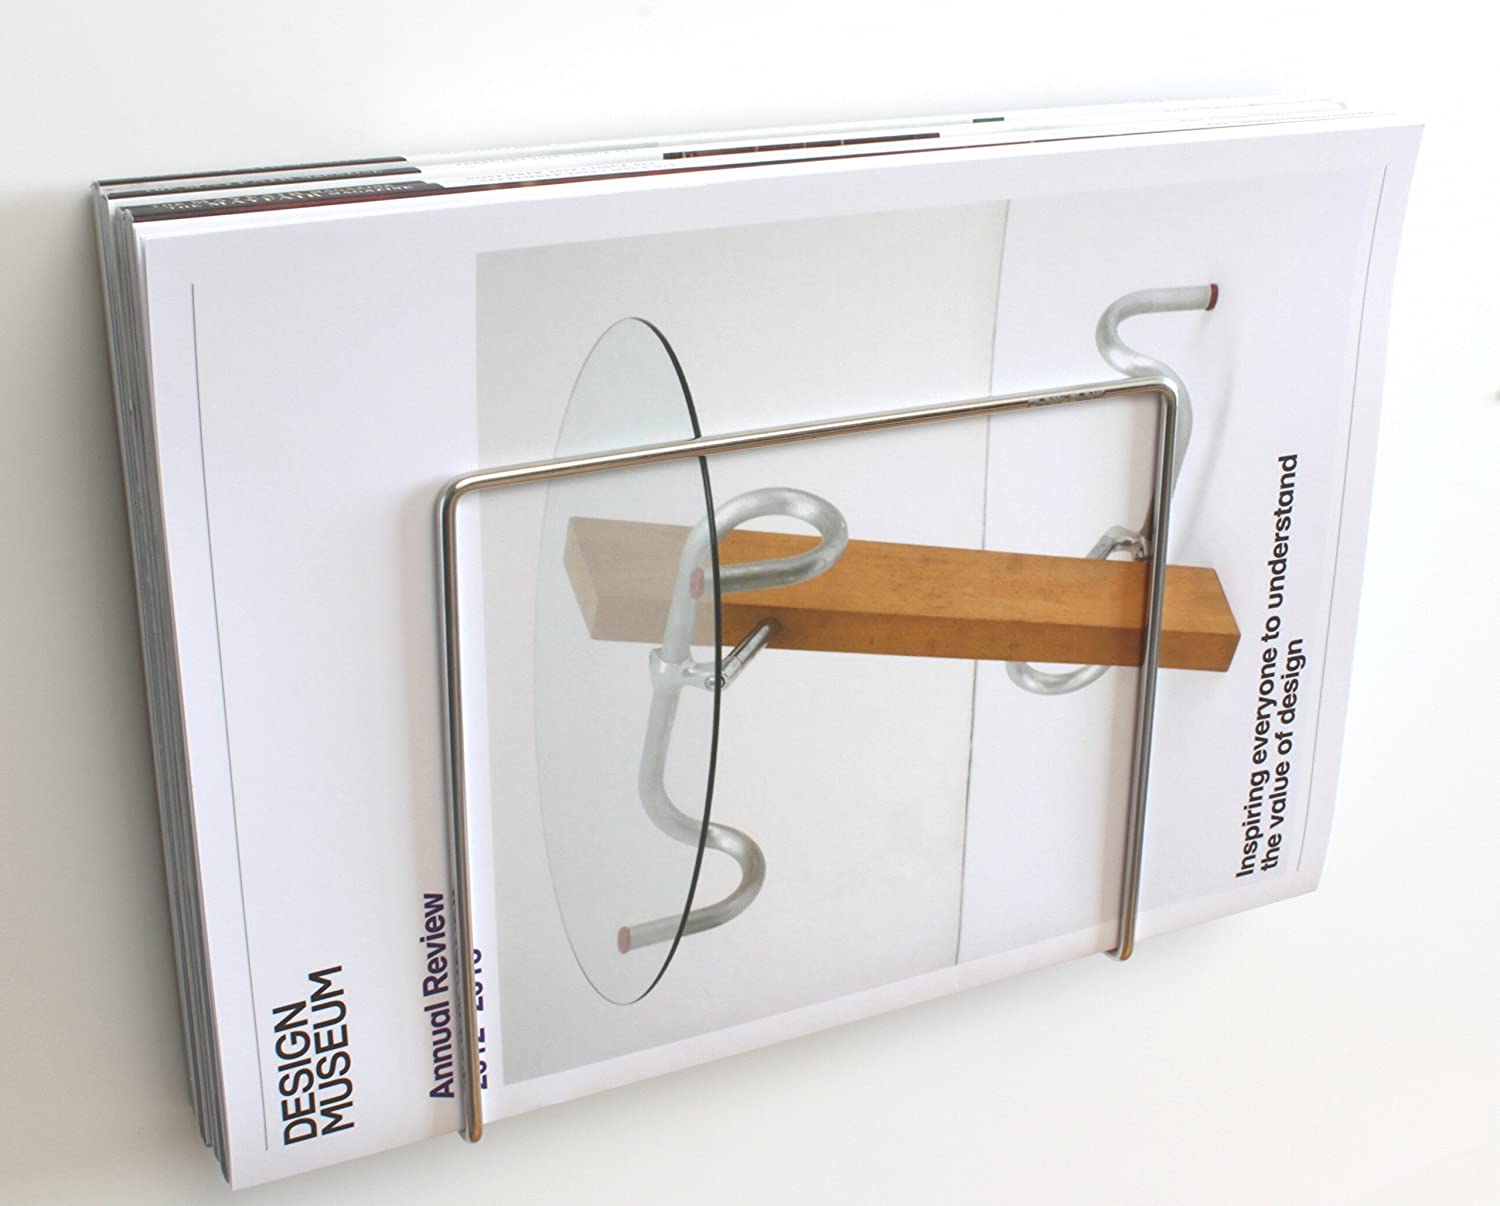 Plew Plew Stainless Steel Wall Mounted Magazine Rack